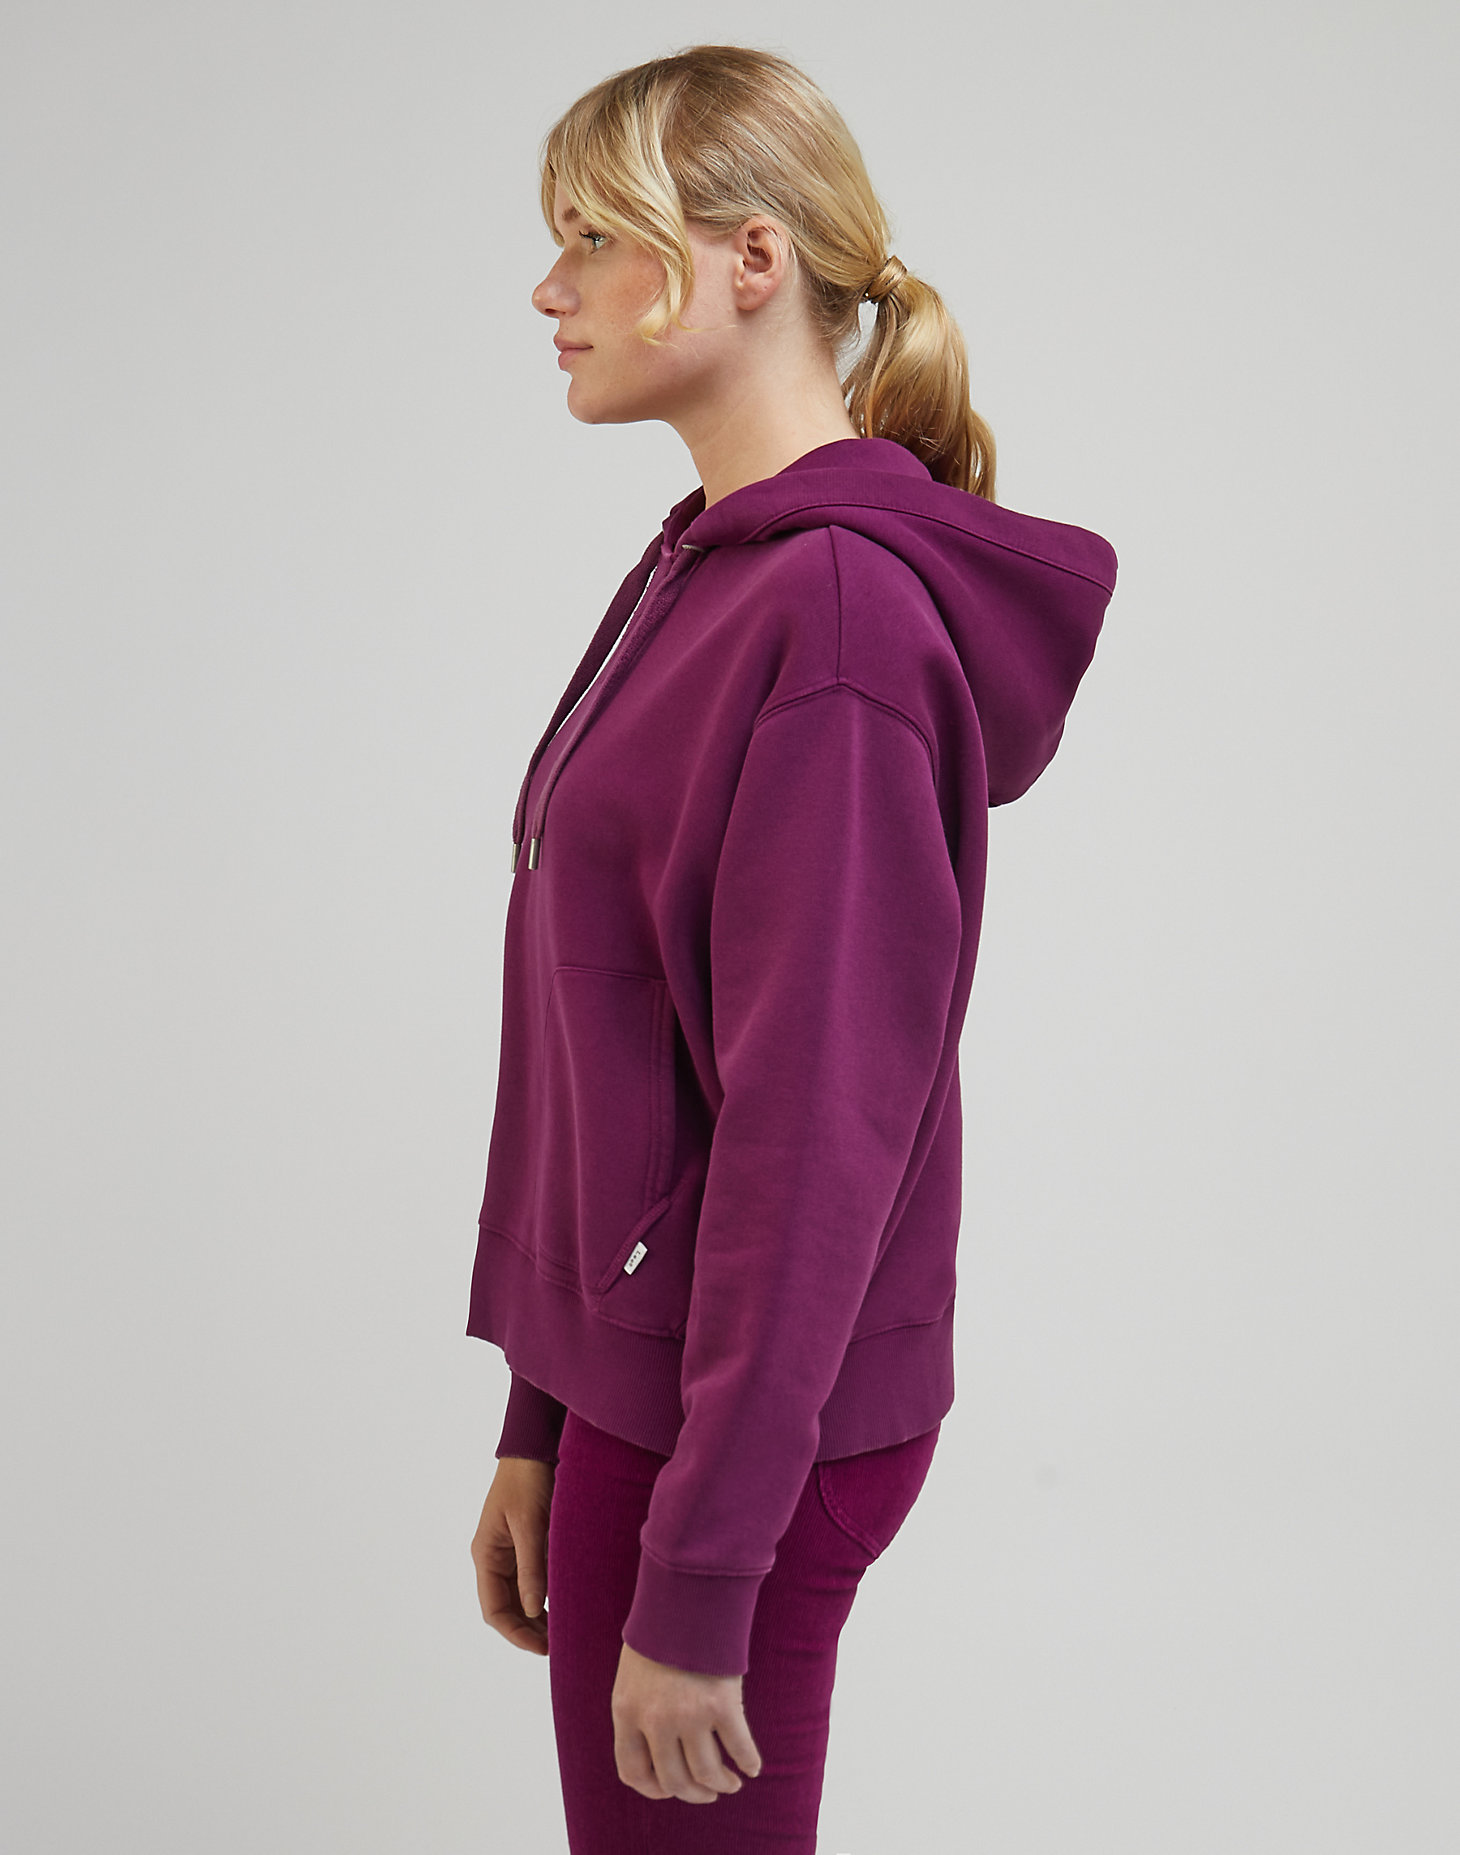 Relaxed Hoodie in Foxy Violet alternative view 3